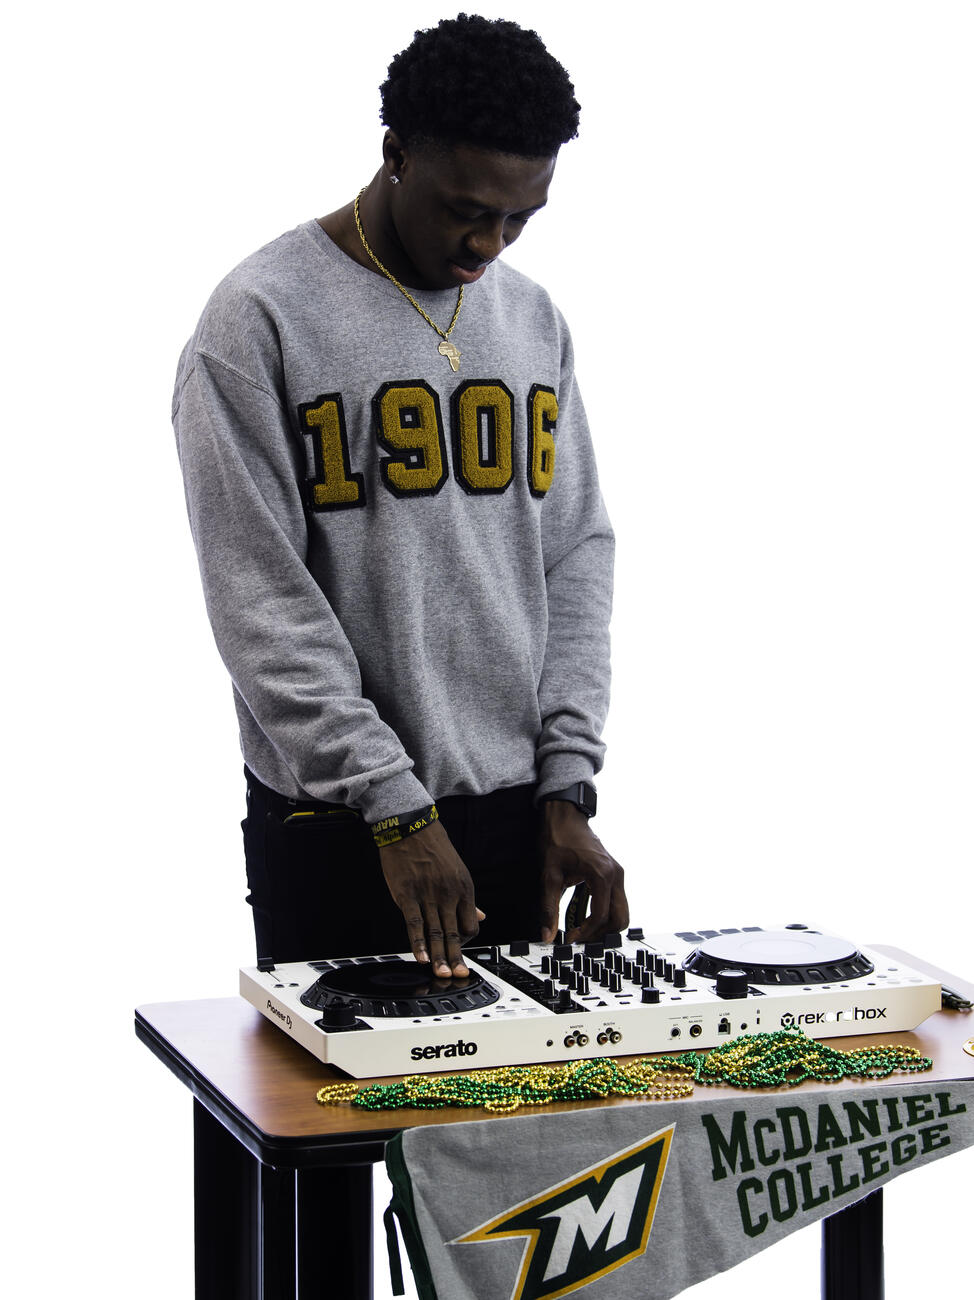 Kekuta Bah poses with a DJ board on a table.